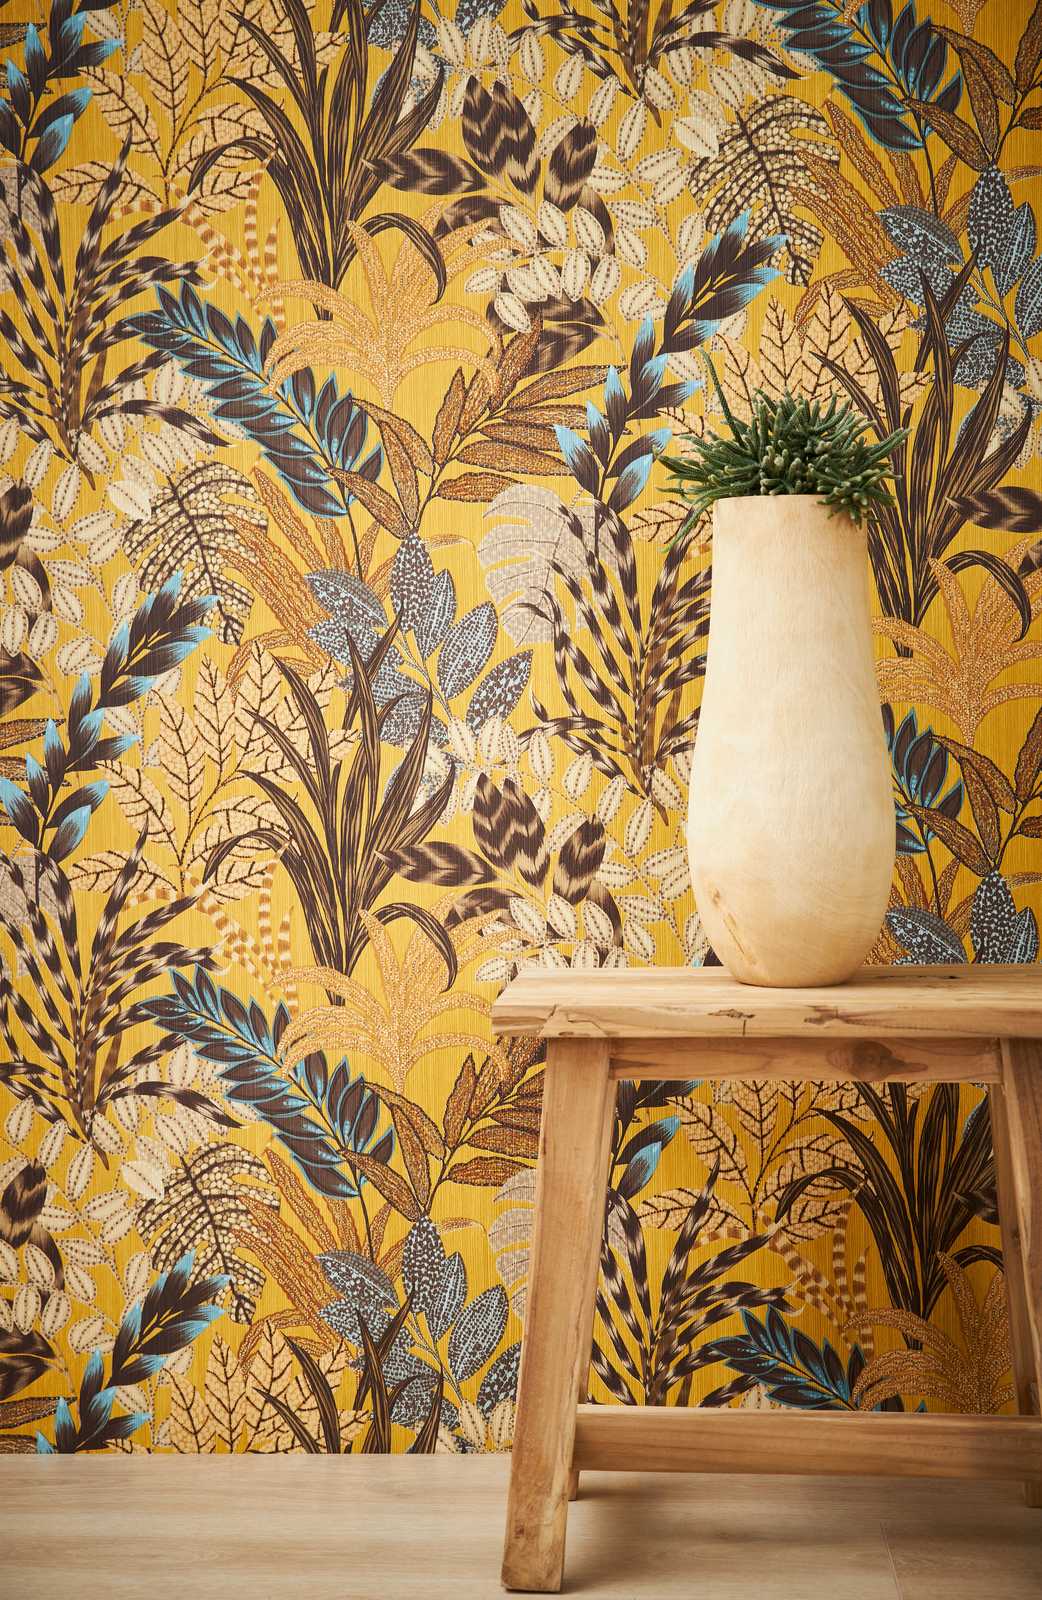             Wallpaper with leaves motif in bright colours - brown, colourful, yellow
        